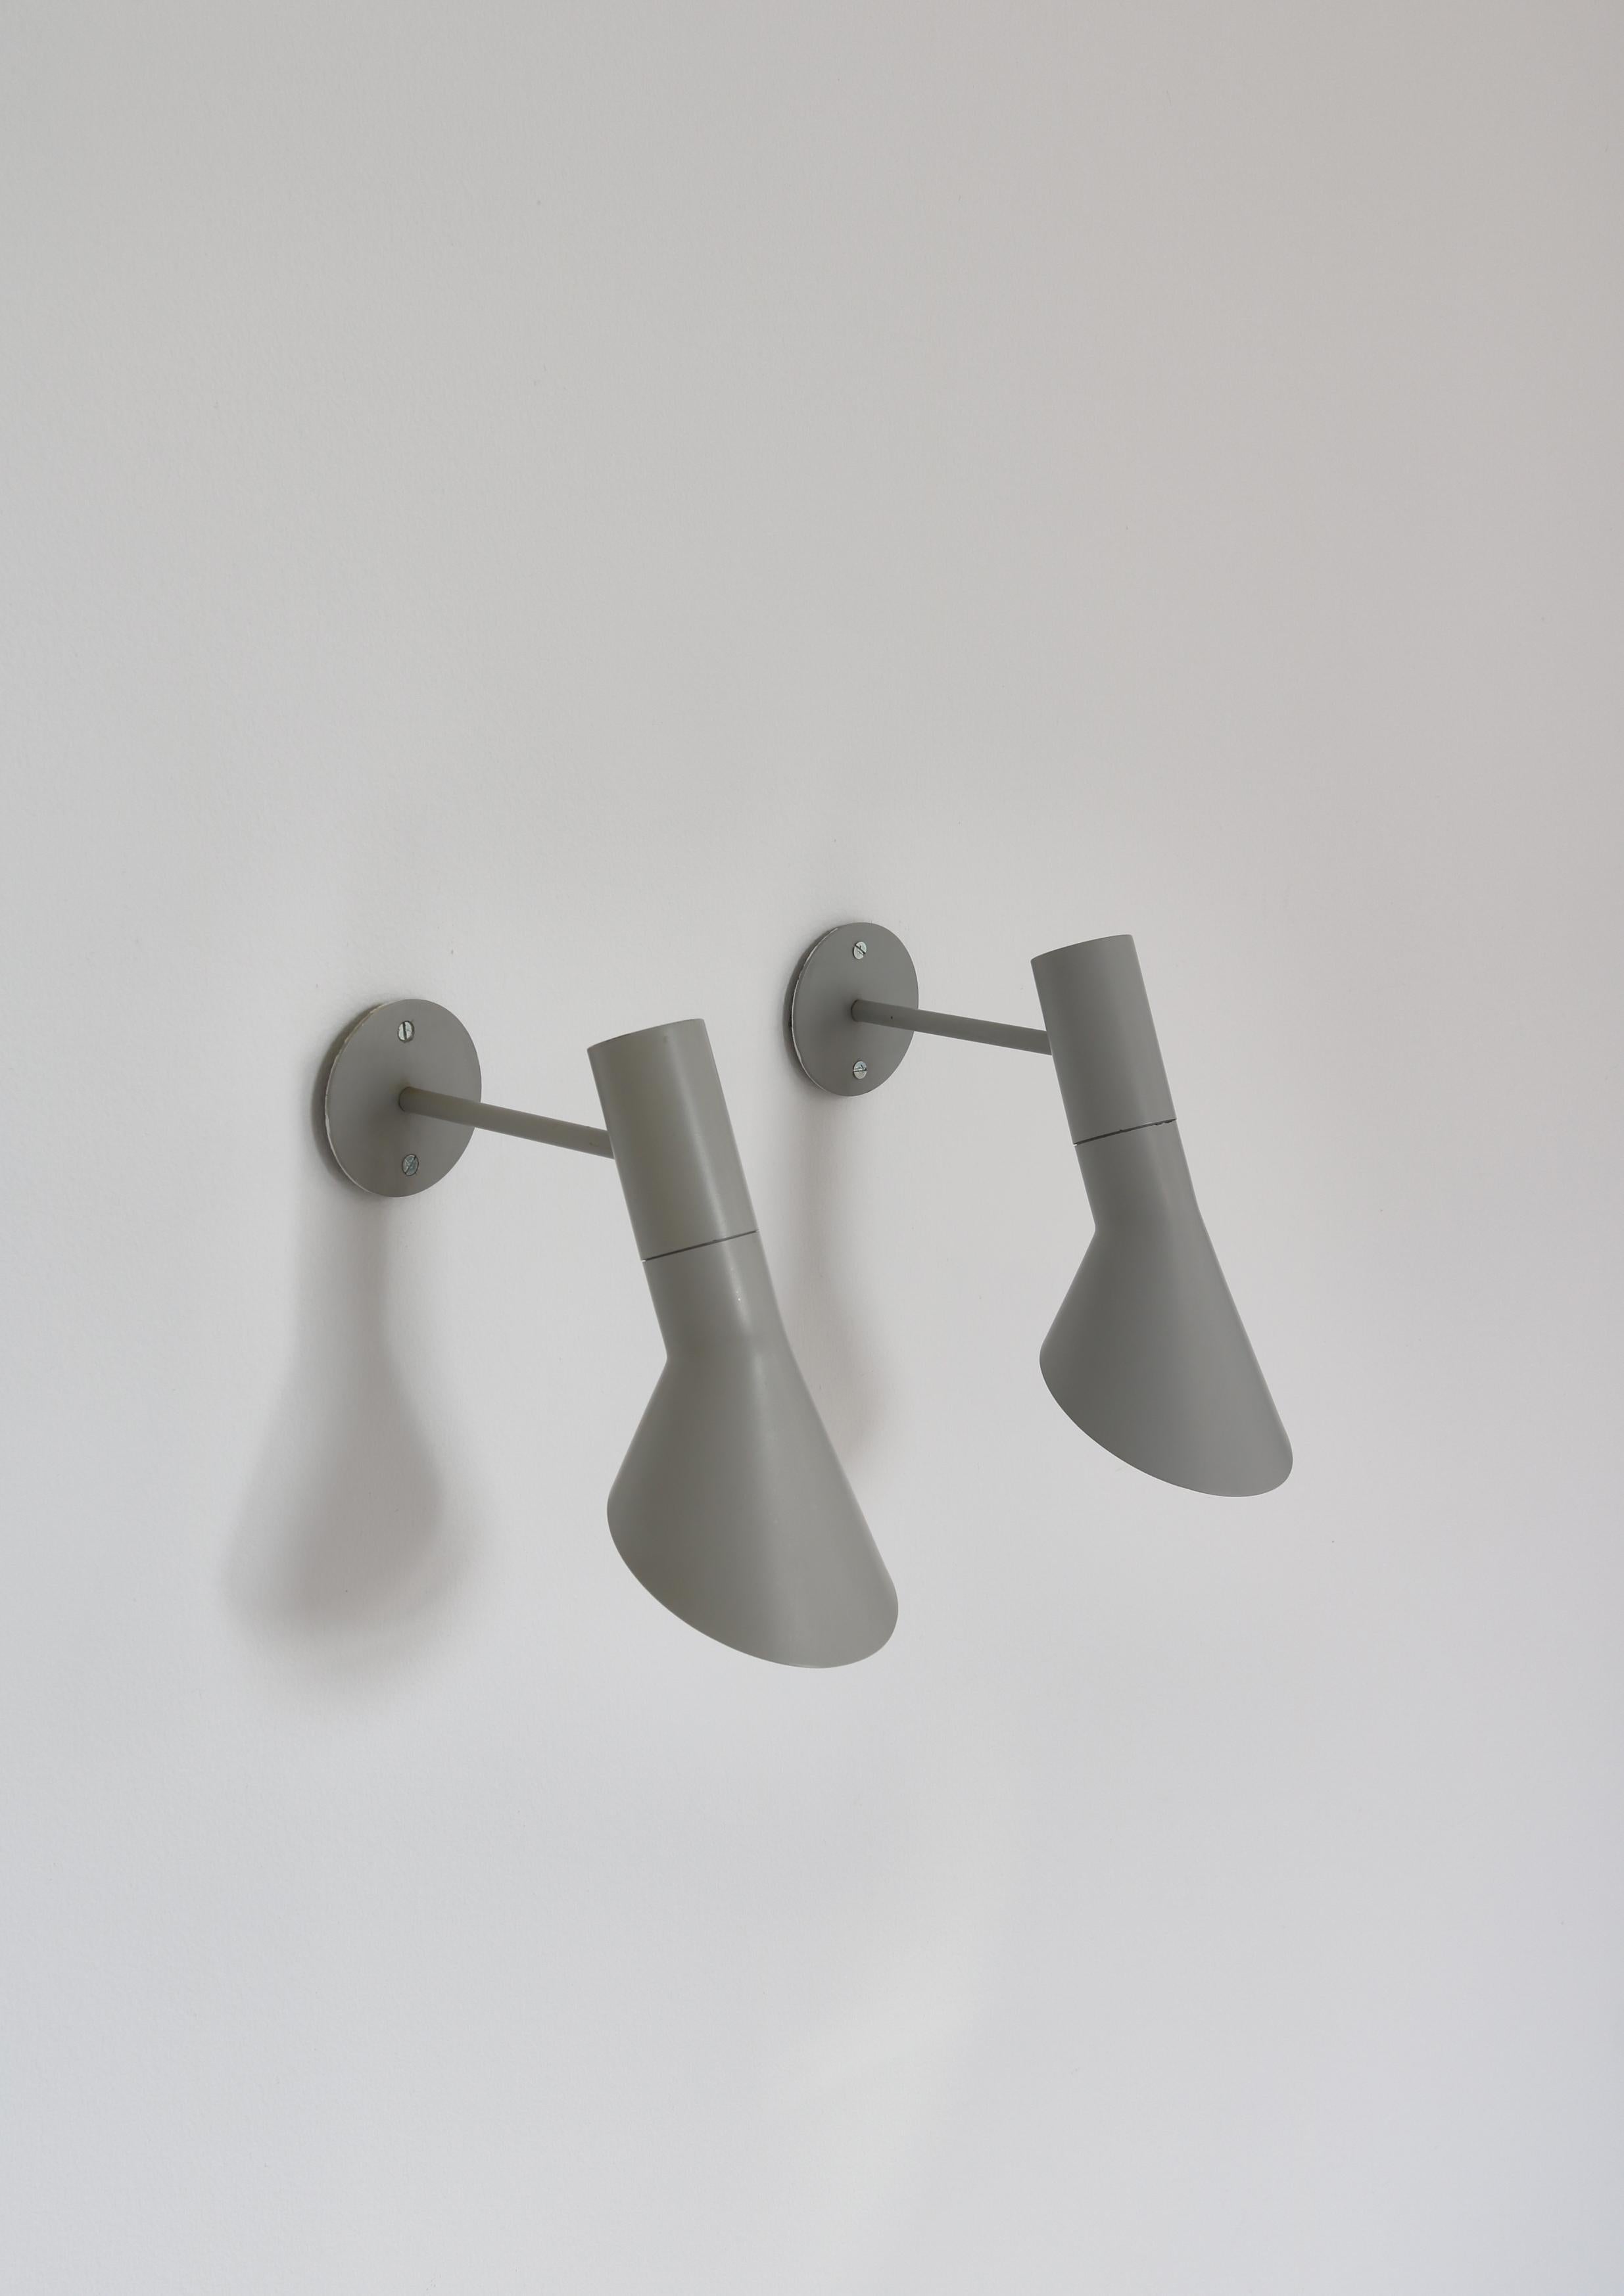 Danish Early Example Arne Jacobsen Visor Wall Lamps in Grey Lacquer Louis Poulsen, 1957 For Sale